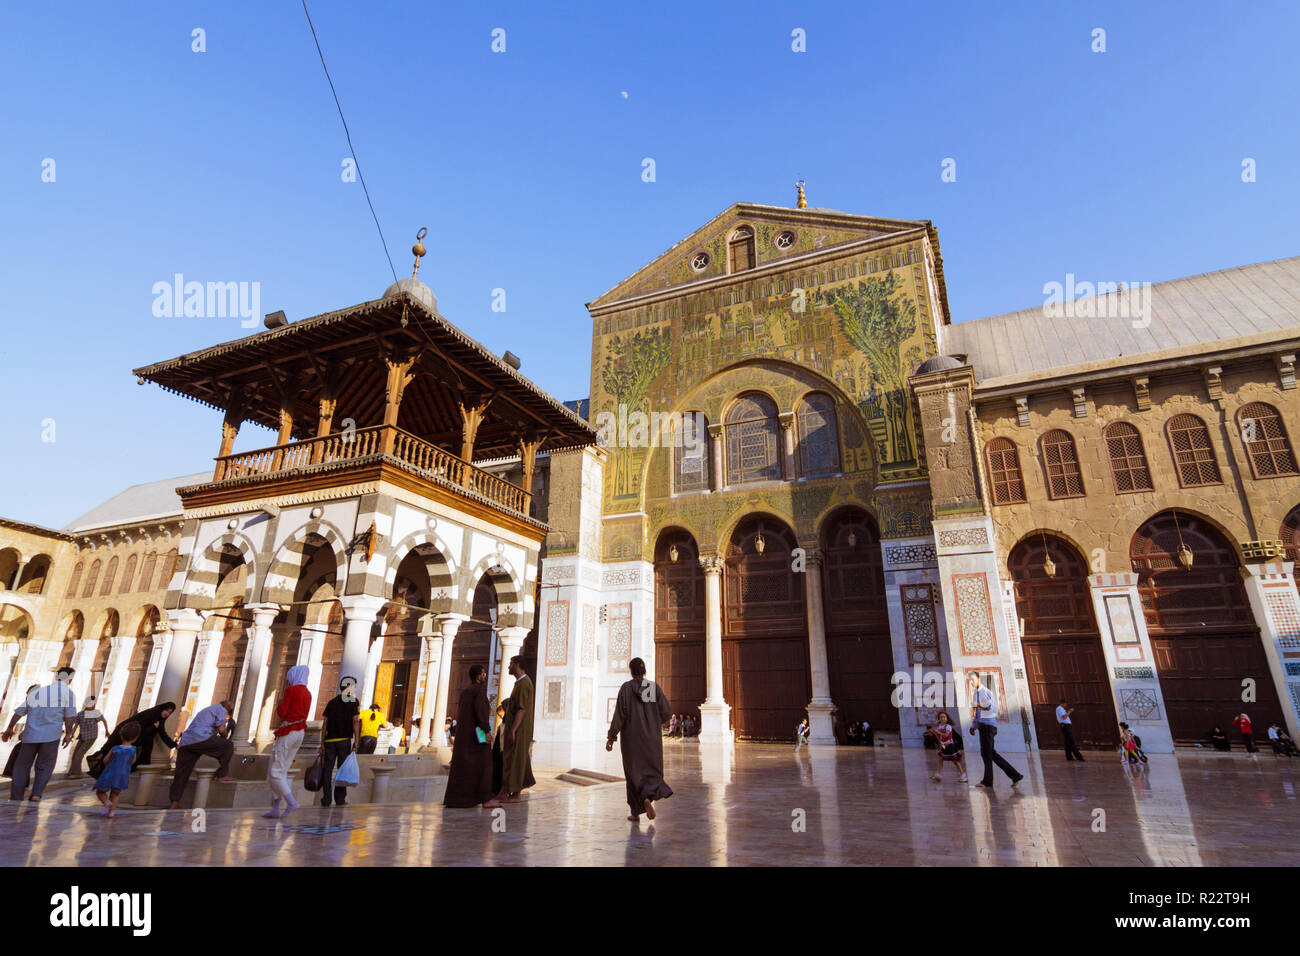 Damascus, Syria : People at the courtyard of the Umayyad Great Mosque of Damascus one of the largest and oldest in the world. Stock Photo